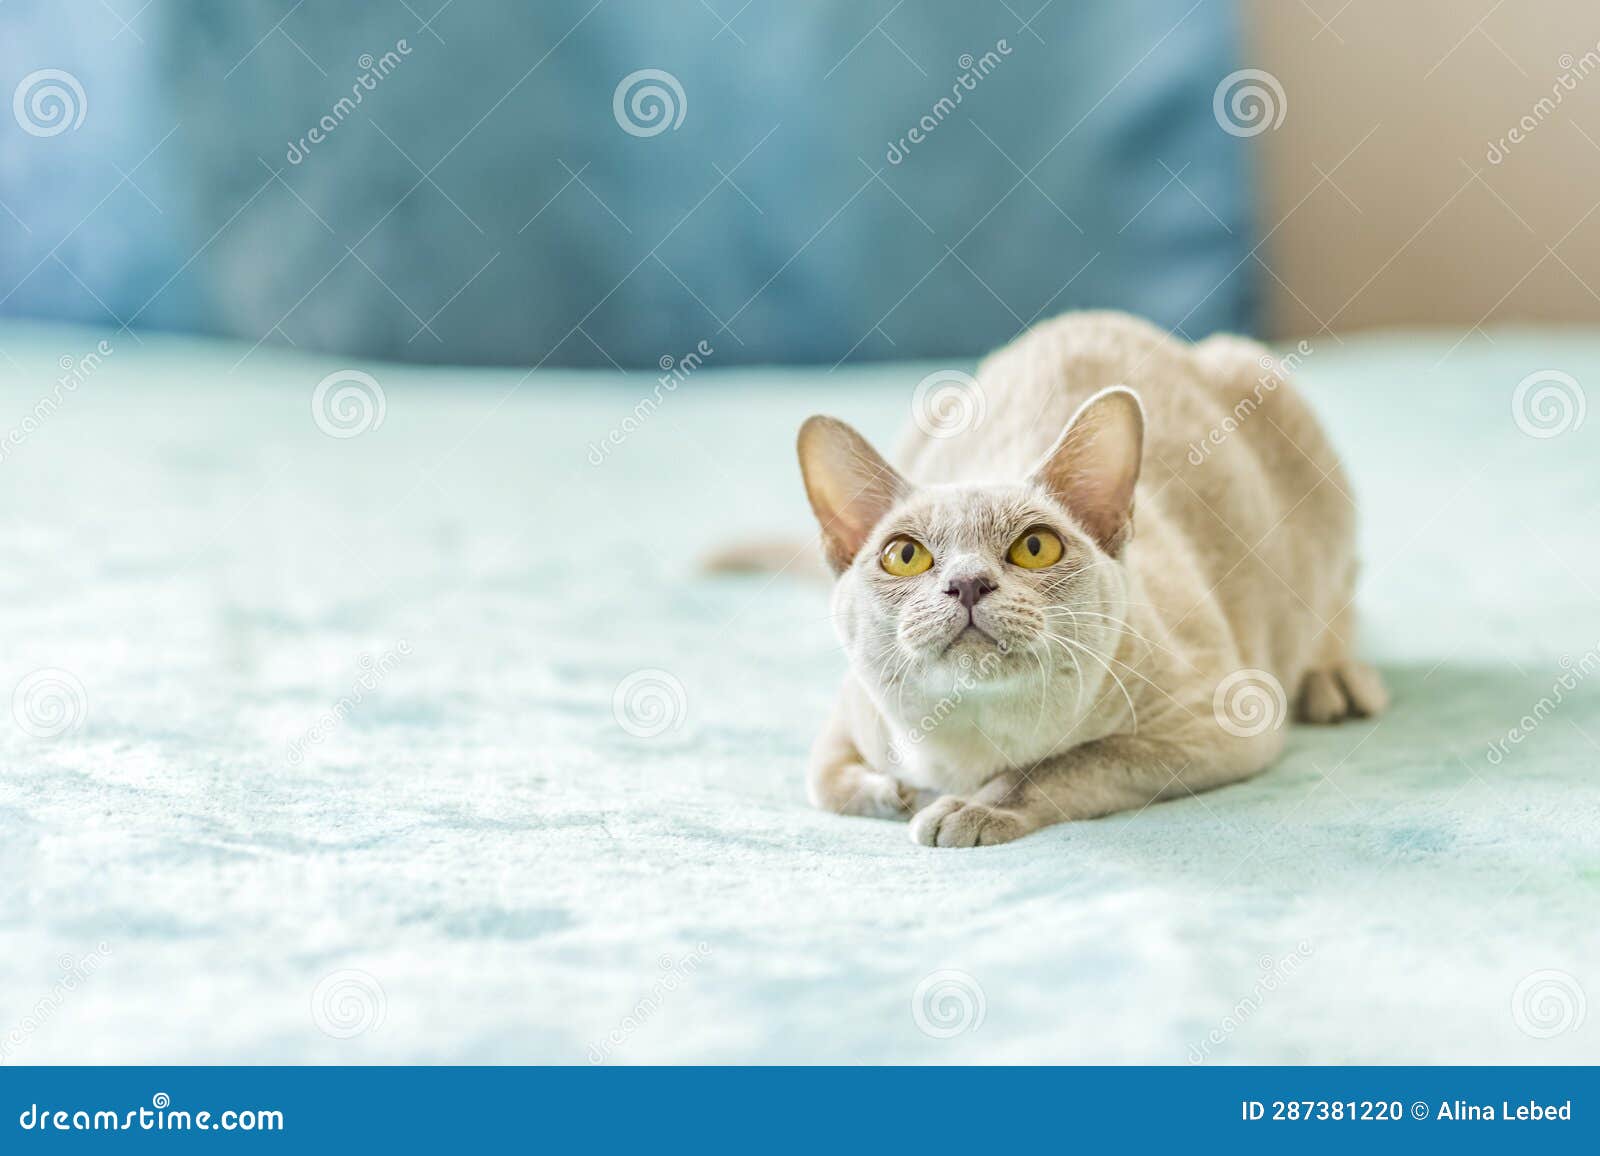 a domestic cat of the burmese breed, the color of champagne with yellow eyes, in a city apartment building. likes to lie on the